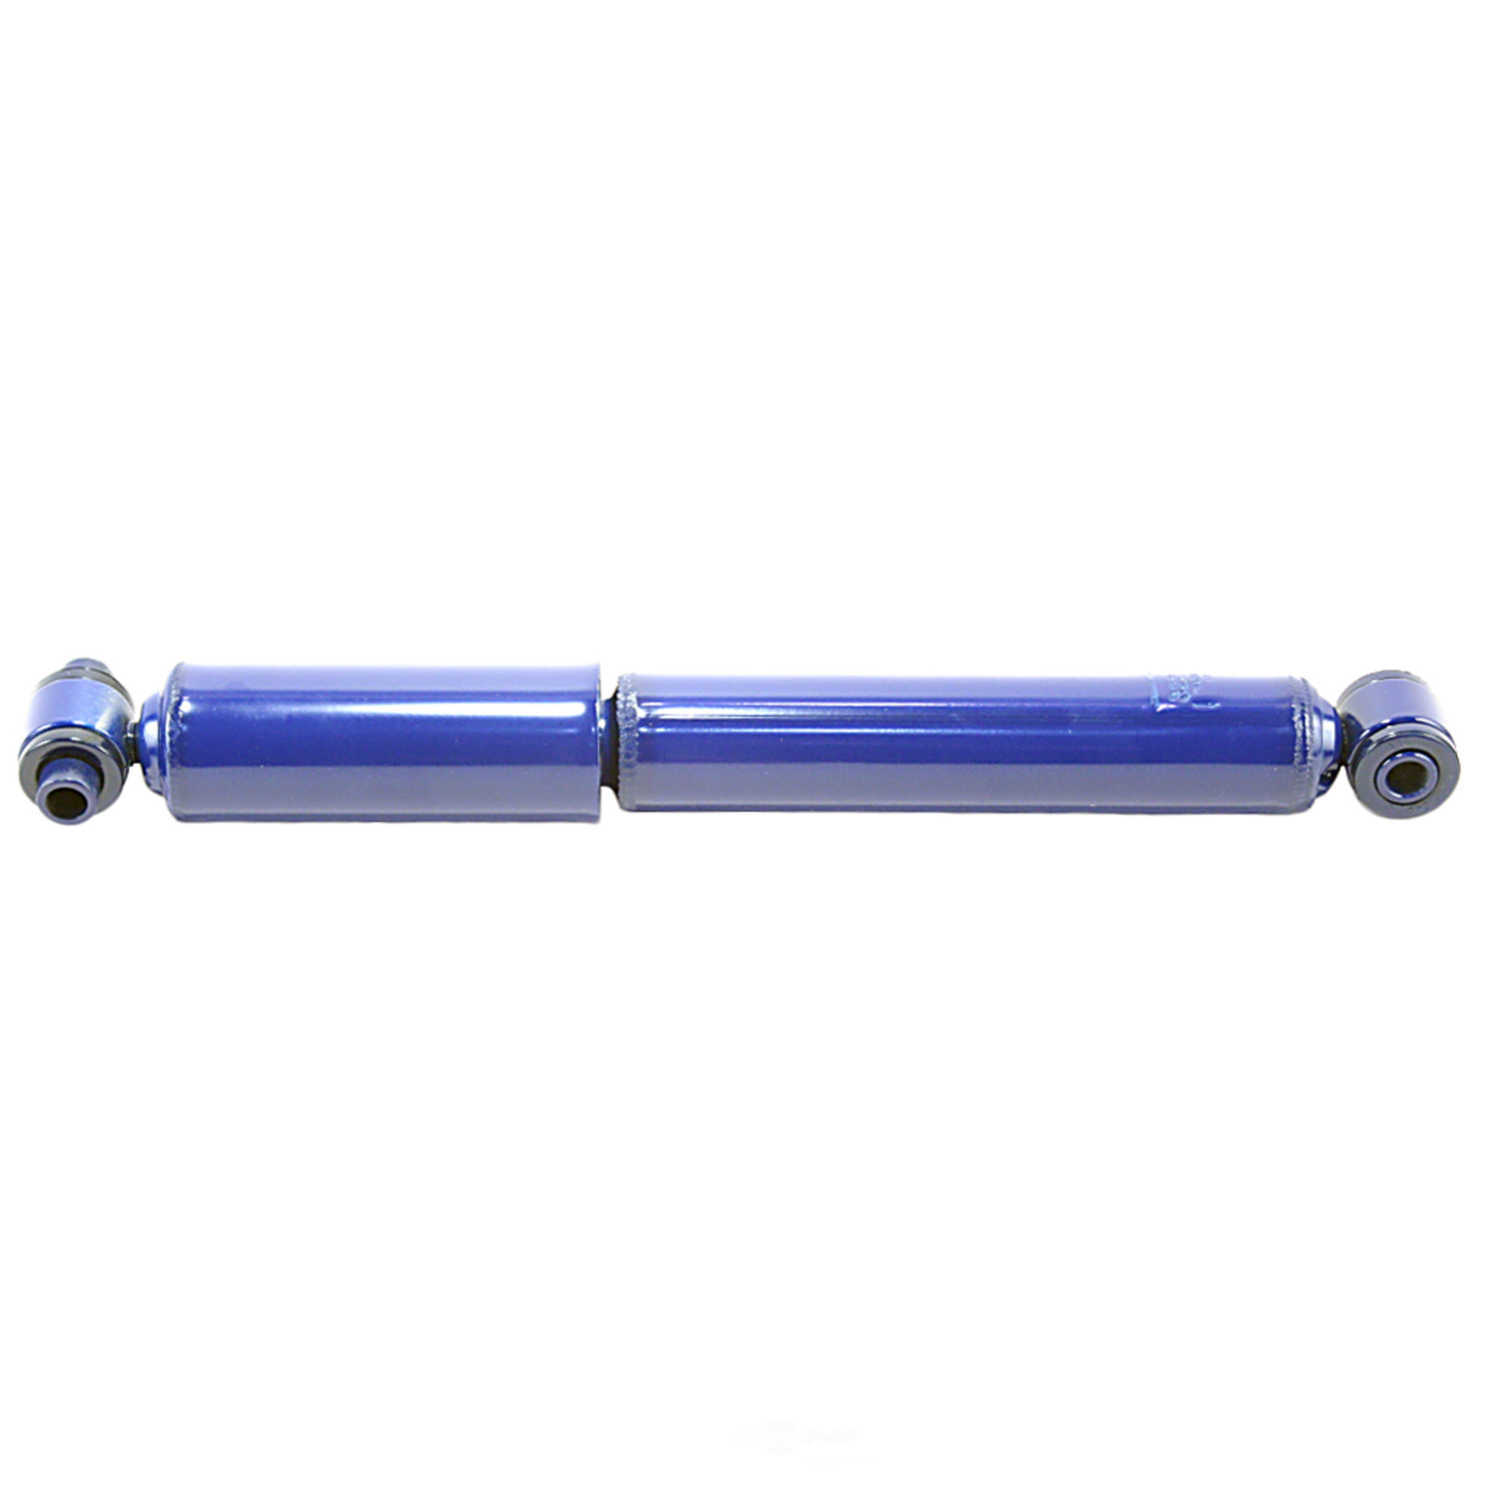 MONROE SHOCKS/STRUTS - Monro-Matic Plus Shock Absorber (With ABS Brakes, Front) - MOE 32373